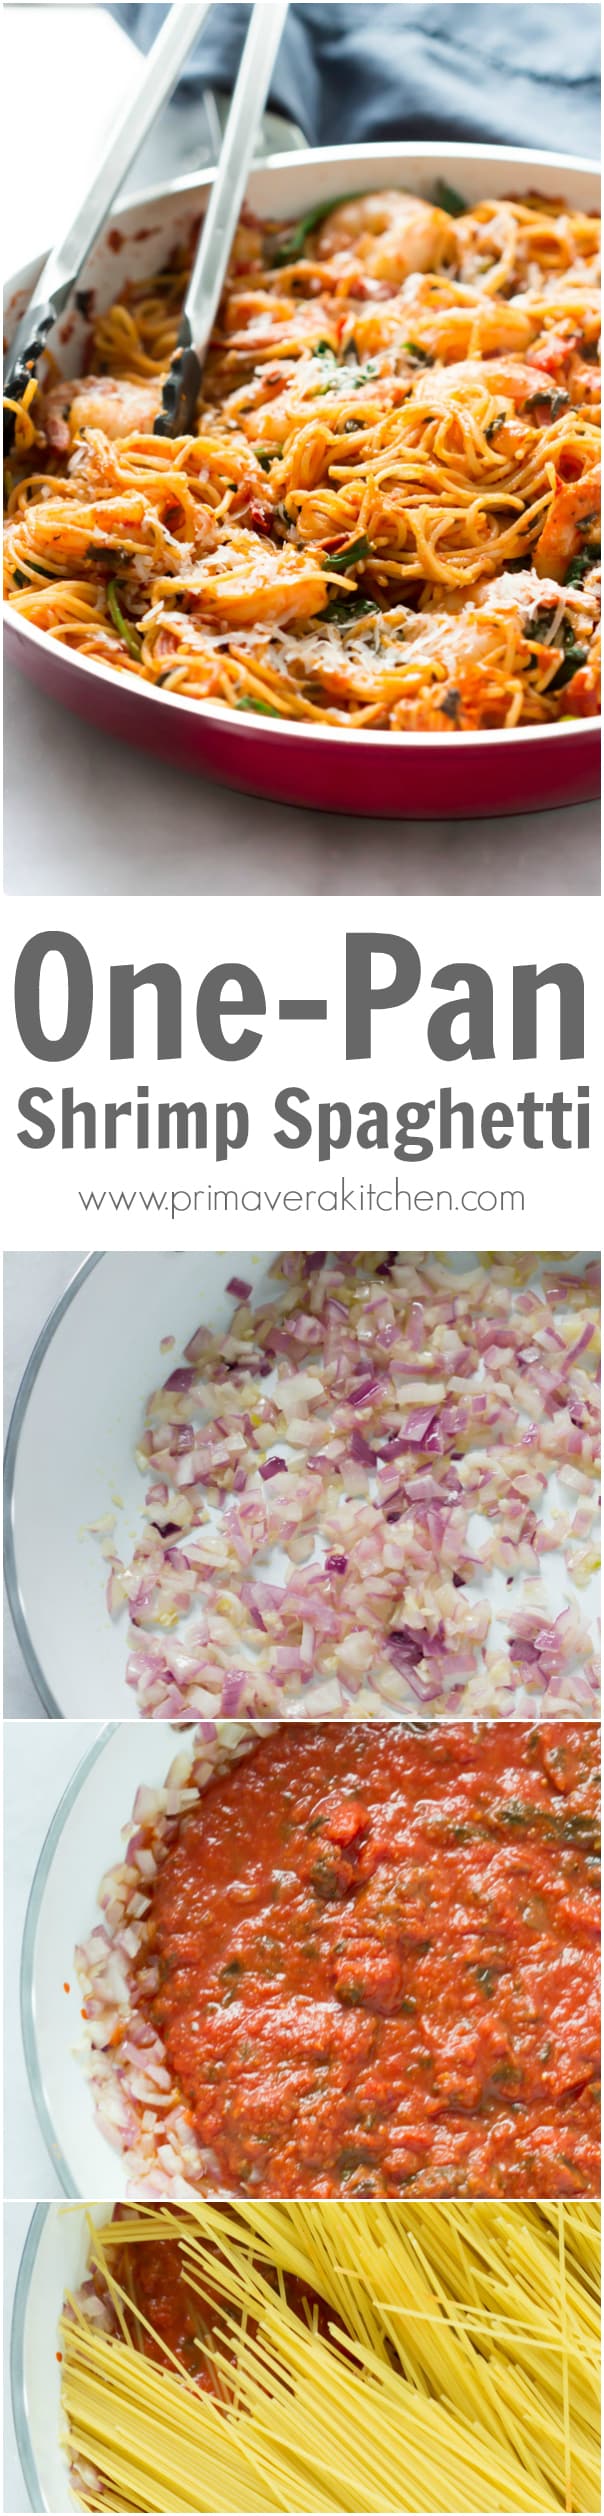 One-pan shrimp spaghetti - This One-Pan Shrimp Spaghetti is super easy to make and you only needs one pan! Definitely a quick and flavourful weeknight recipe with almost no clean up. Amazing!